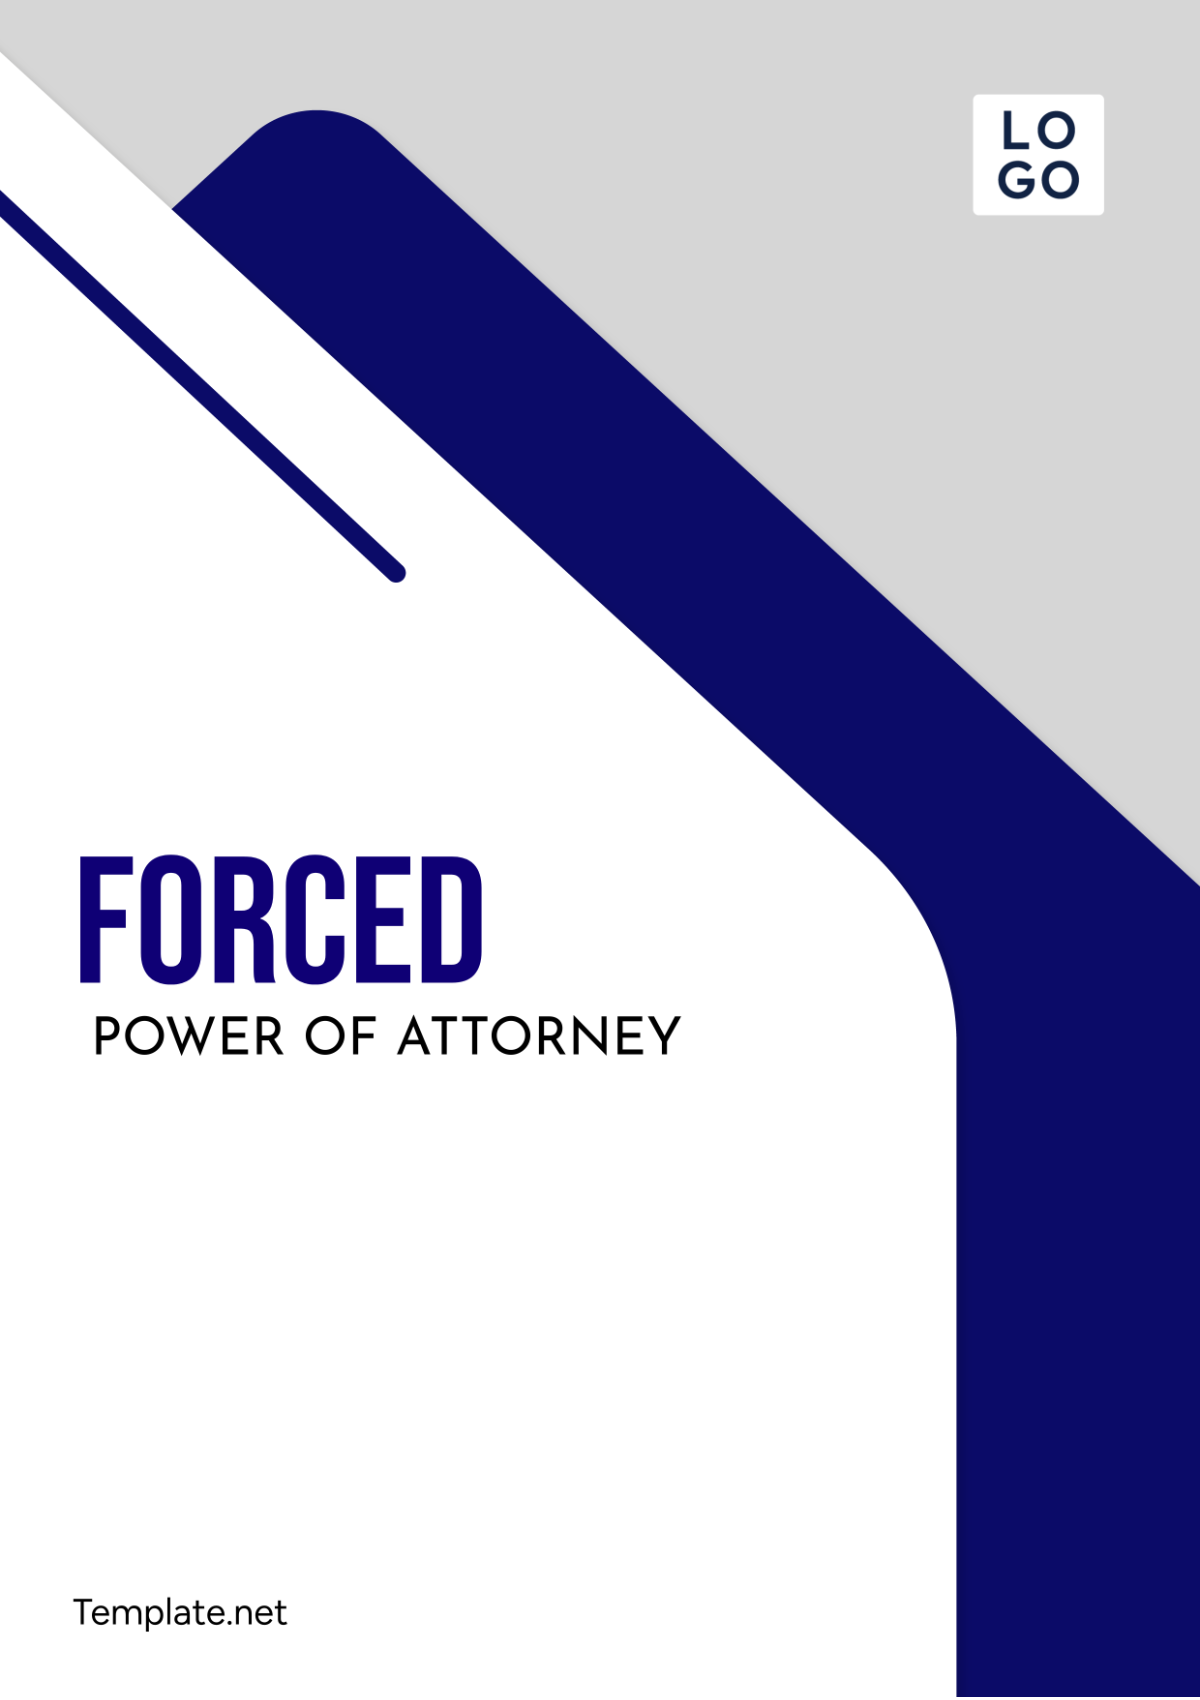 Forced Power of Attorney Template